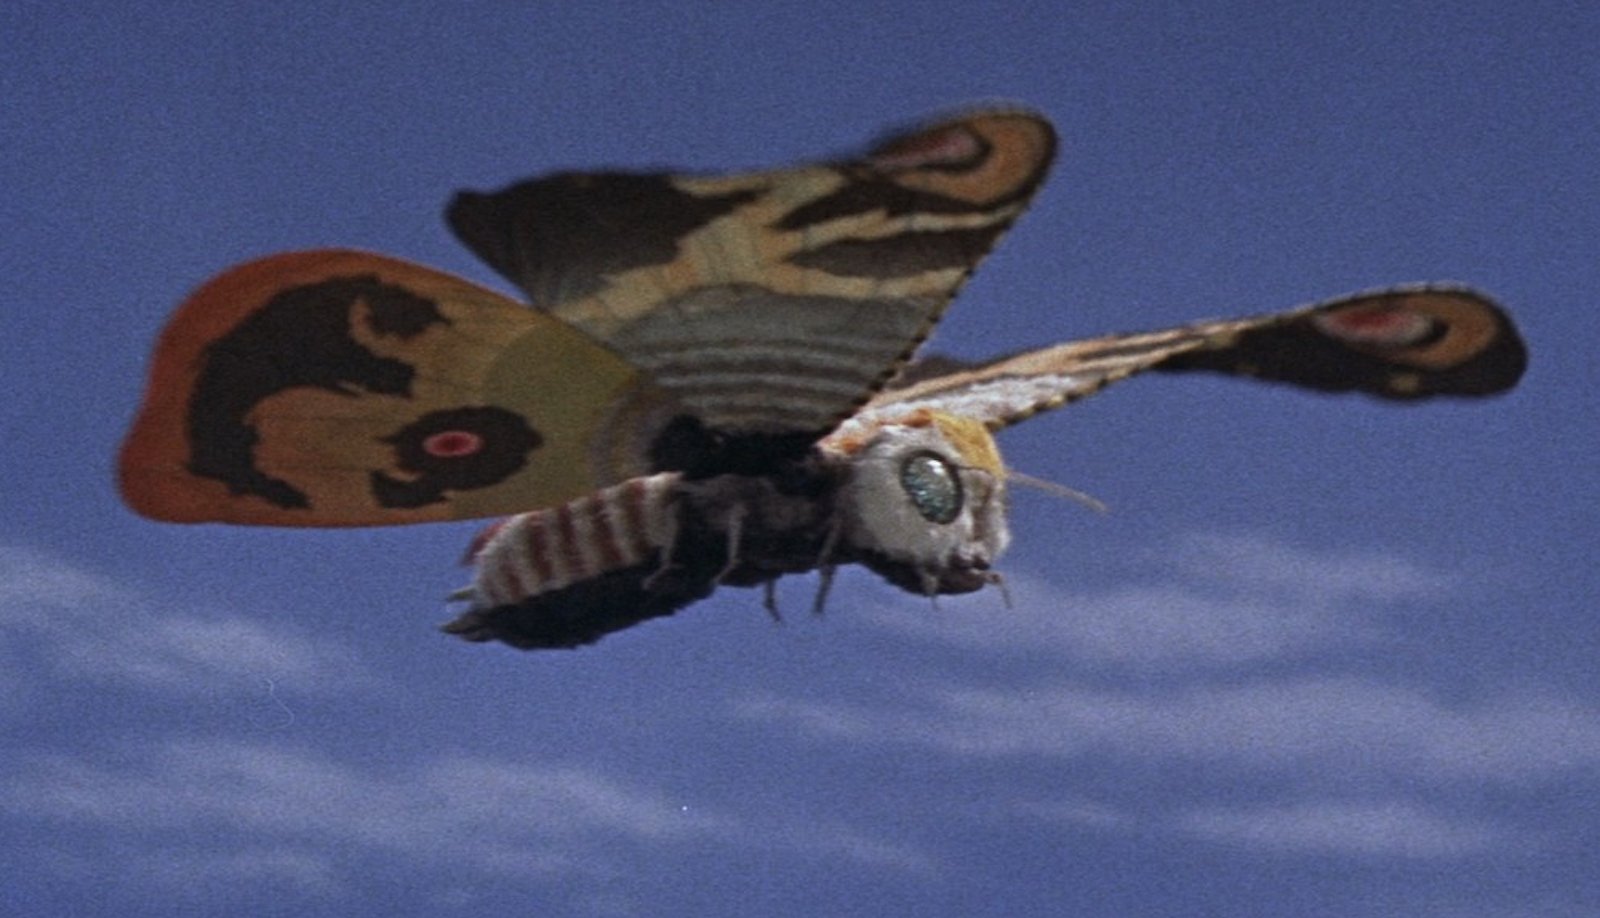 A multicolored moth, clearly fake, flies in the air against a blue sky